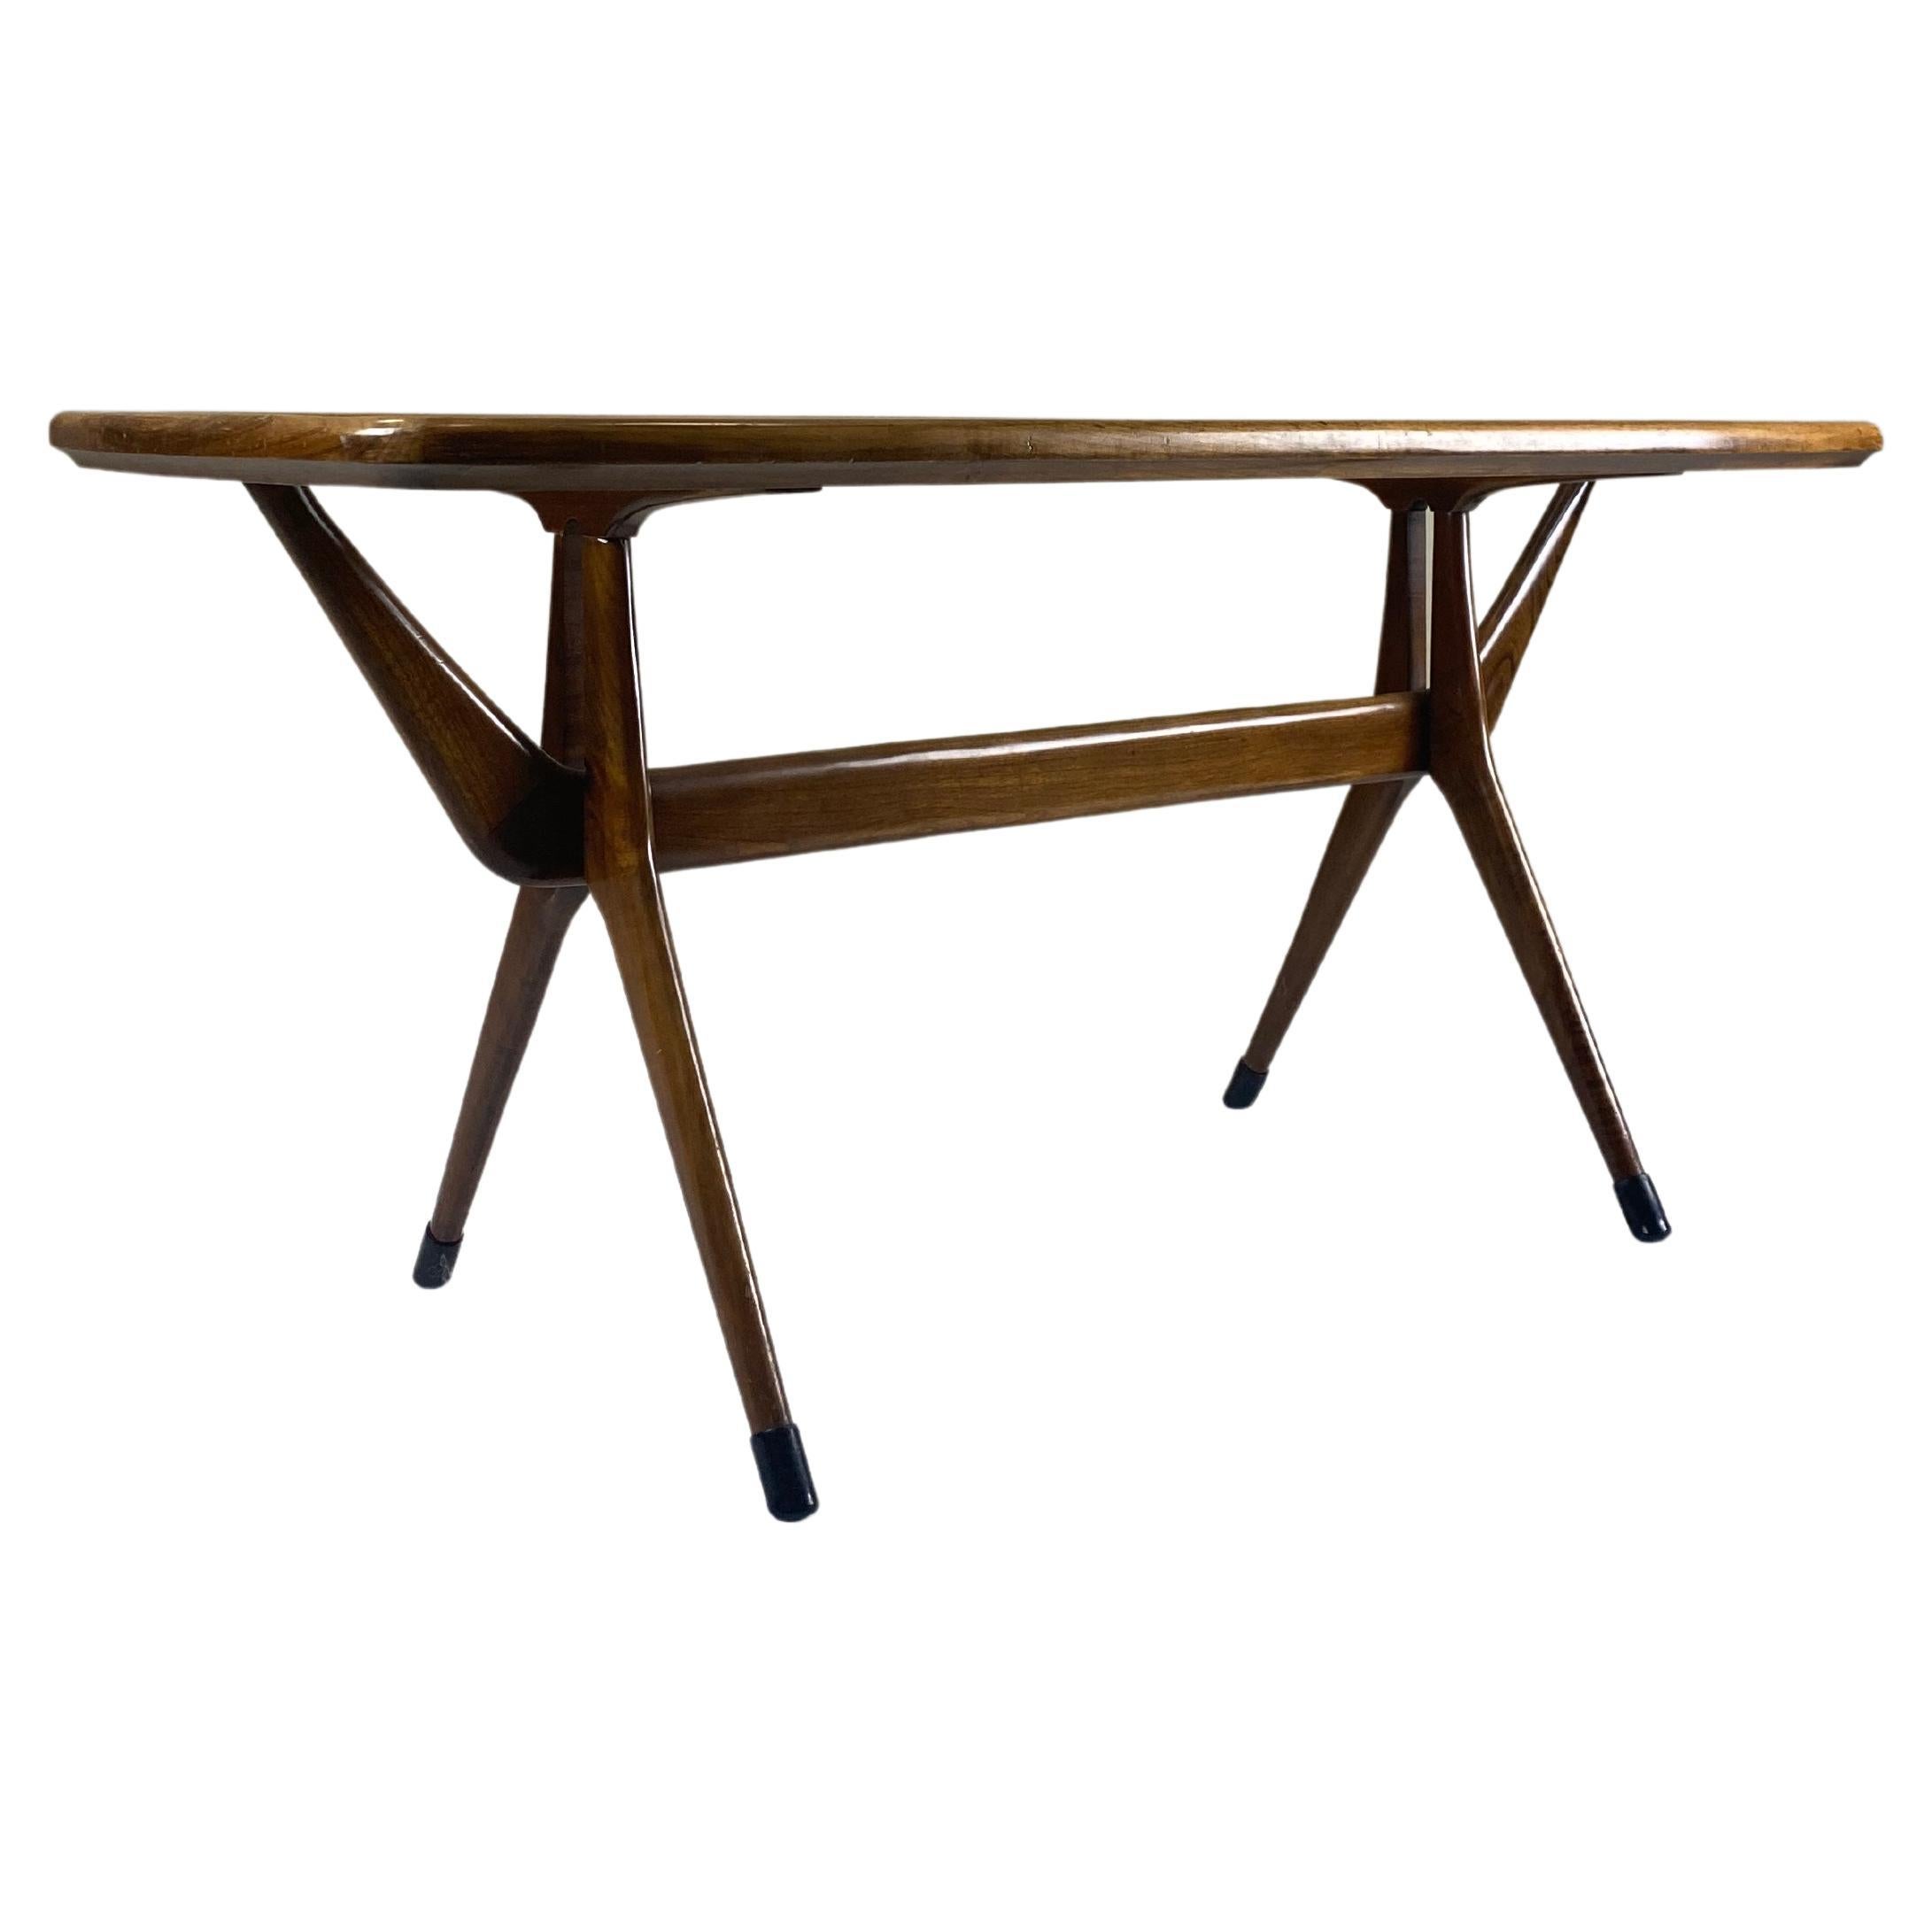 Italian Avantgarde Walnut Coffee Table, Attributed to Cesare Lacca for Cassina For Sale